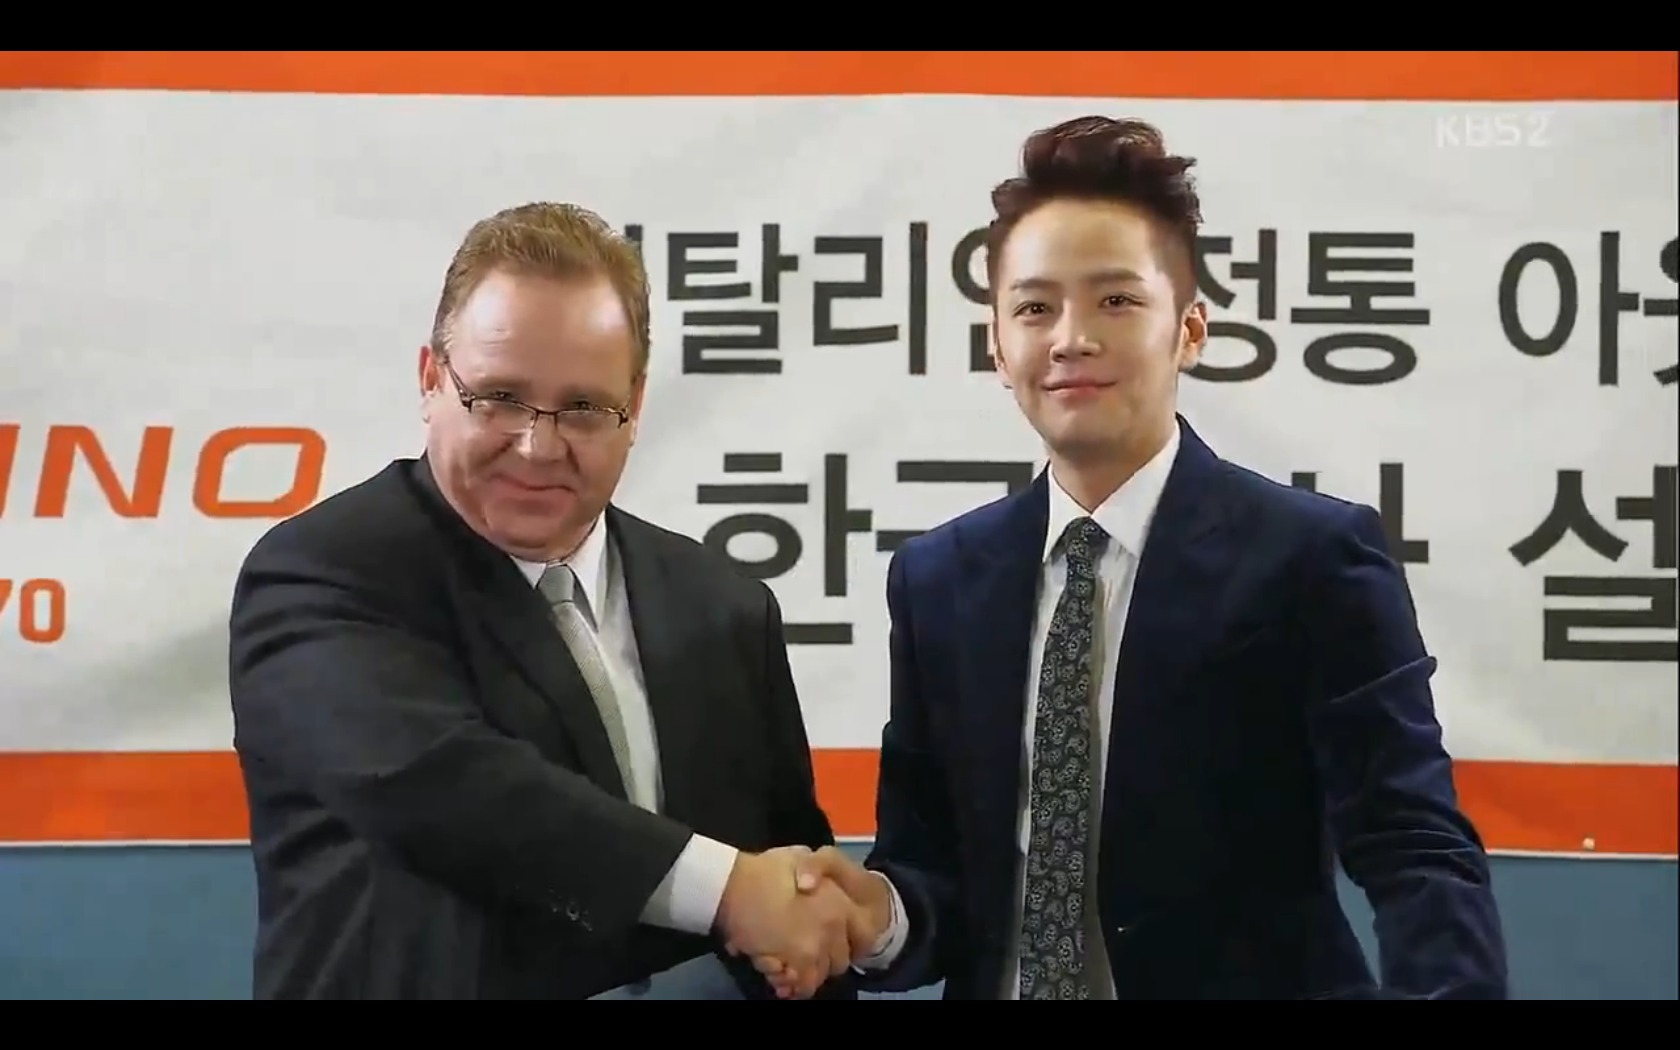 Still of Dean Dawson as CEO Richard Rose shaking hands with Dok-go Mate (Jang,Geun-seok) as the most beautiful man in the world on KBS television.